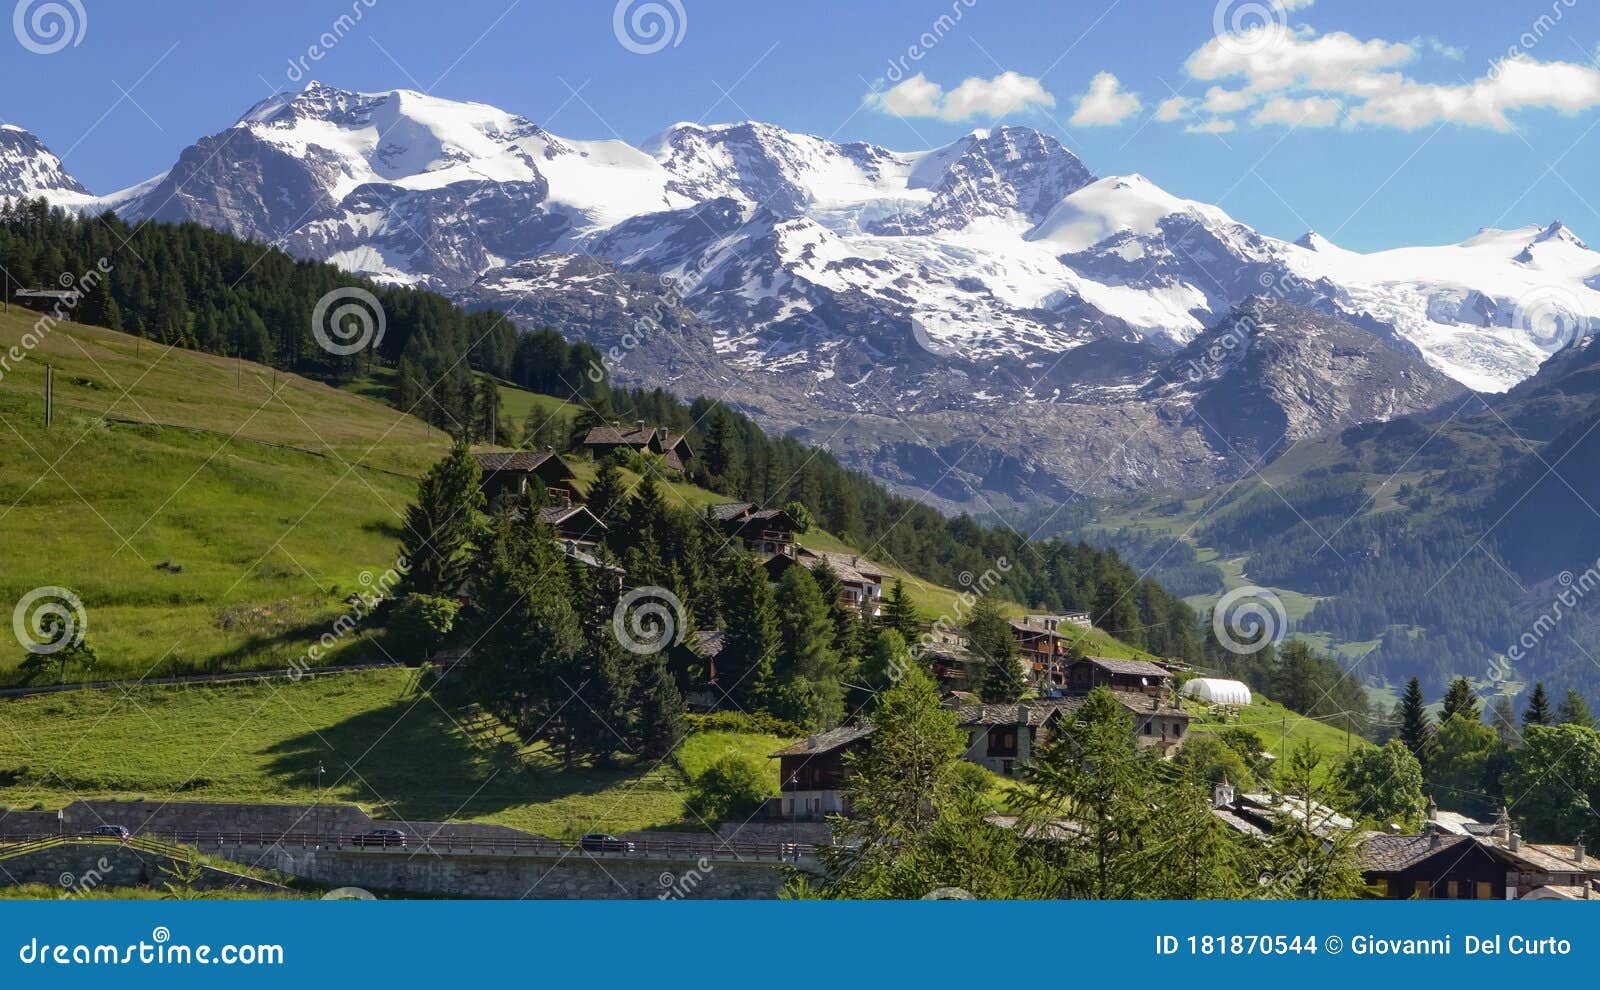 mountain with snow and grass in valle d`aosta in italy